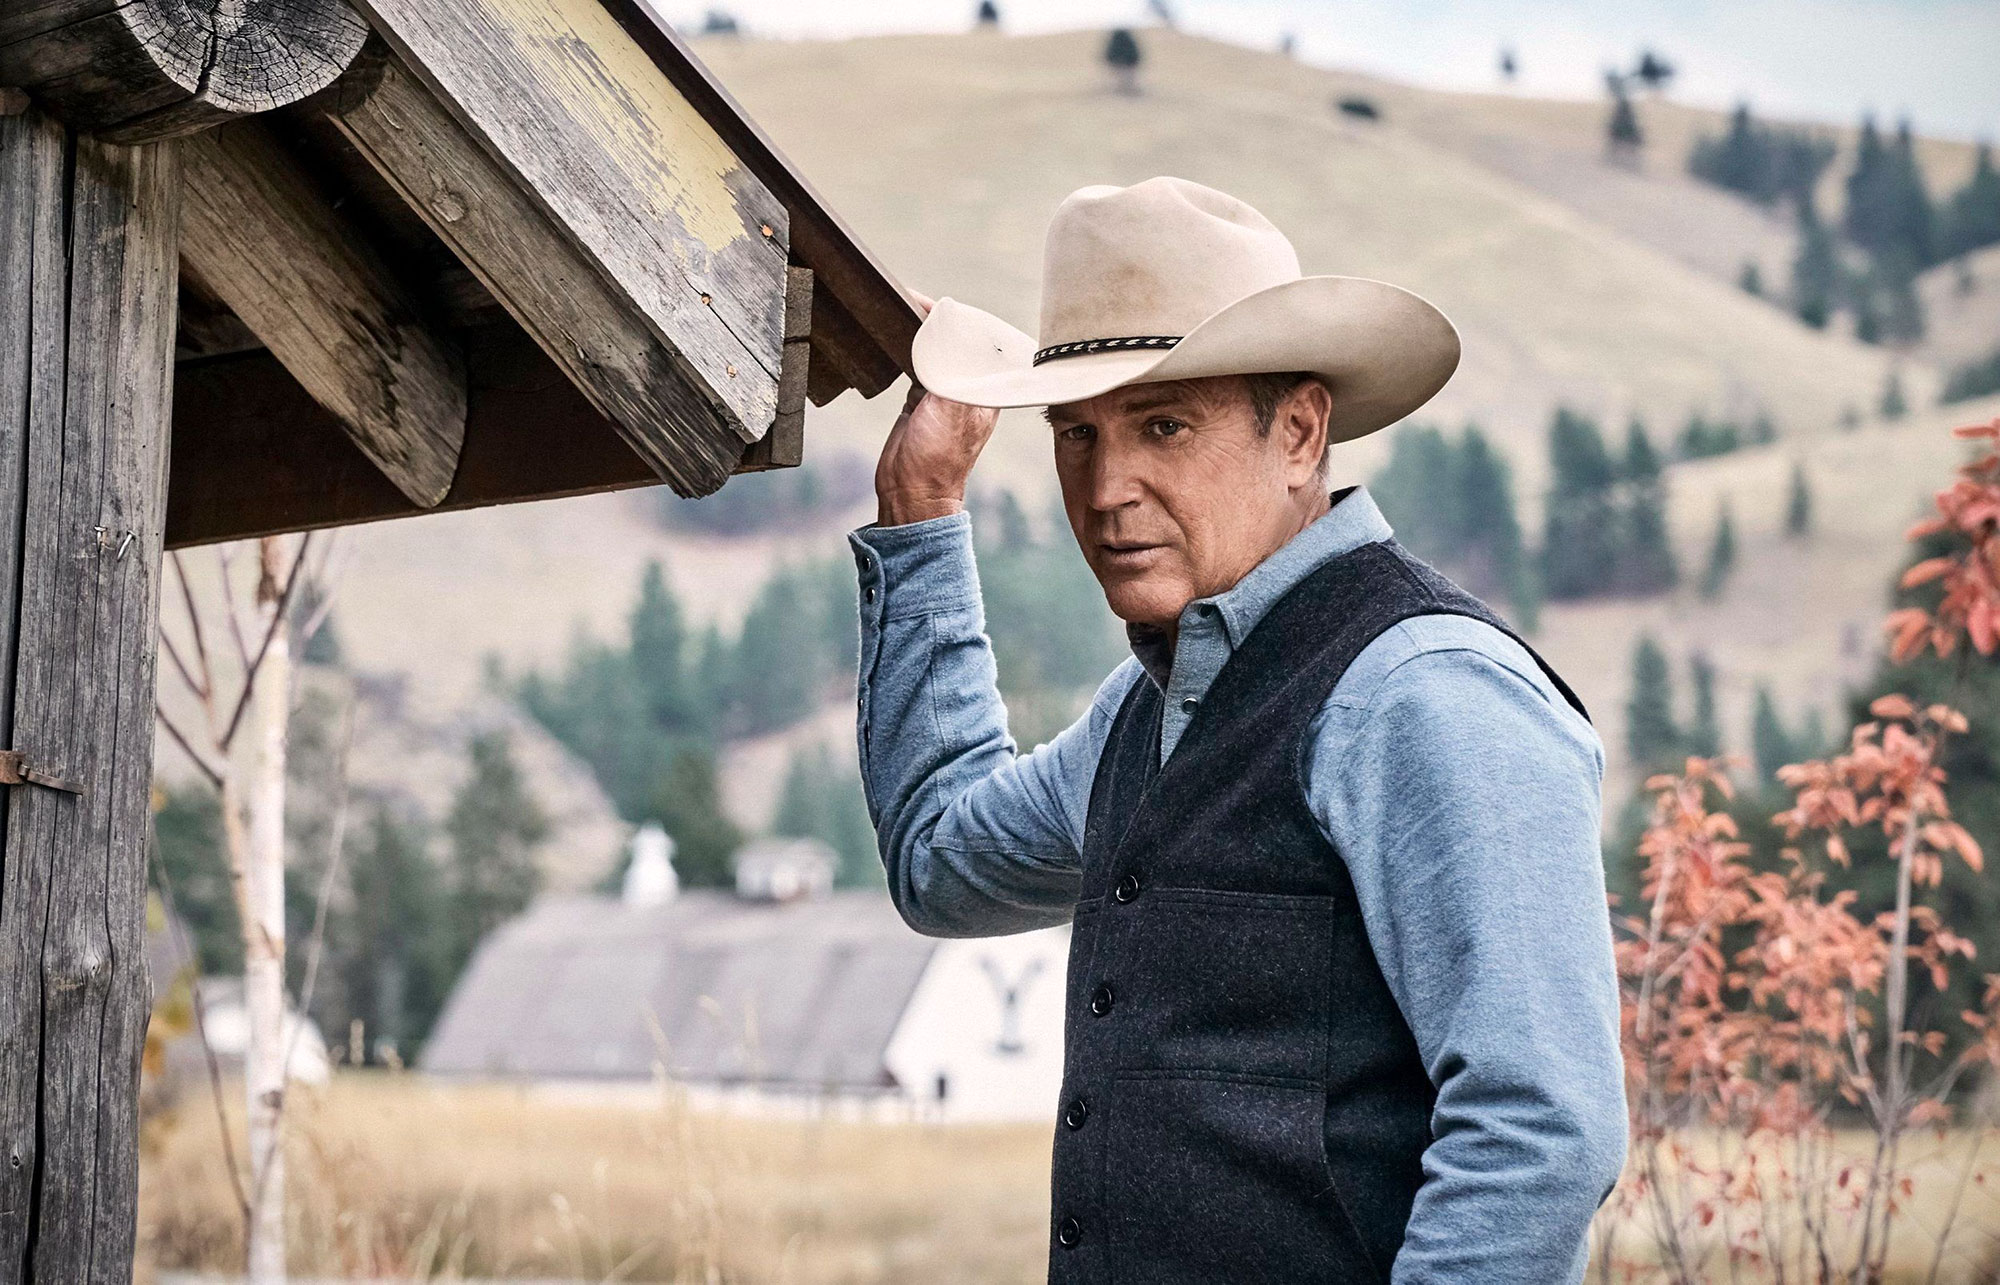 How To Watch Yellowstone Season 4 For Free On Paramount